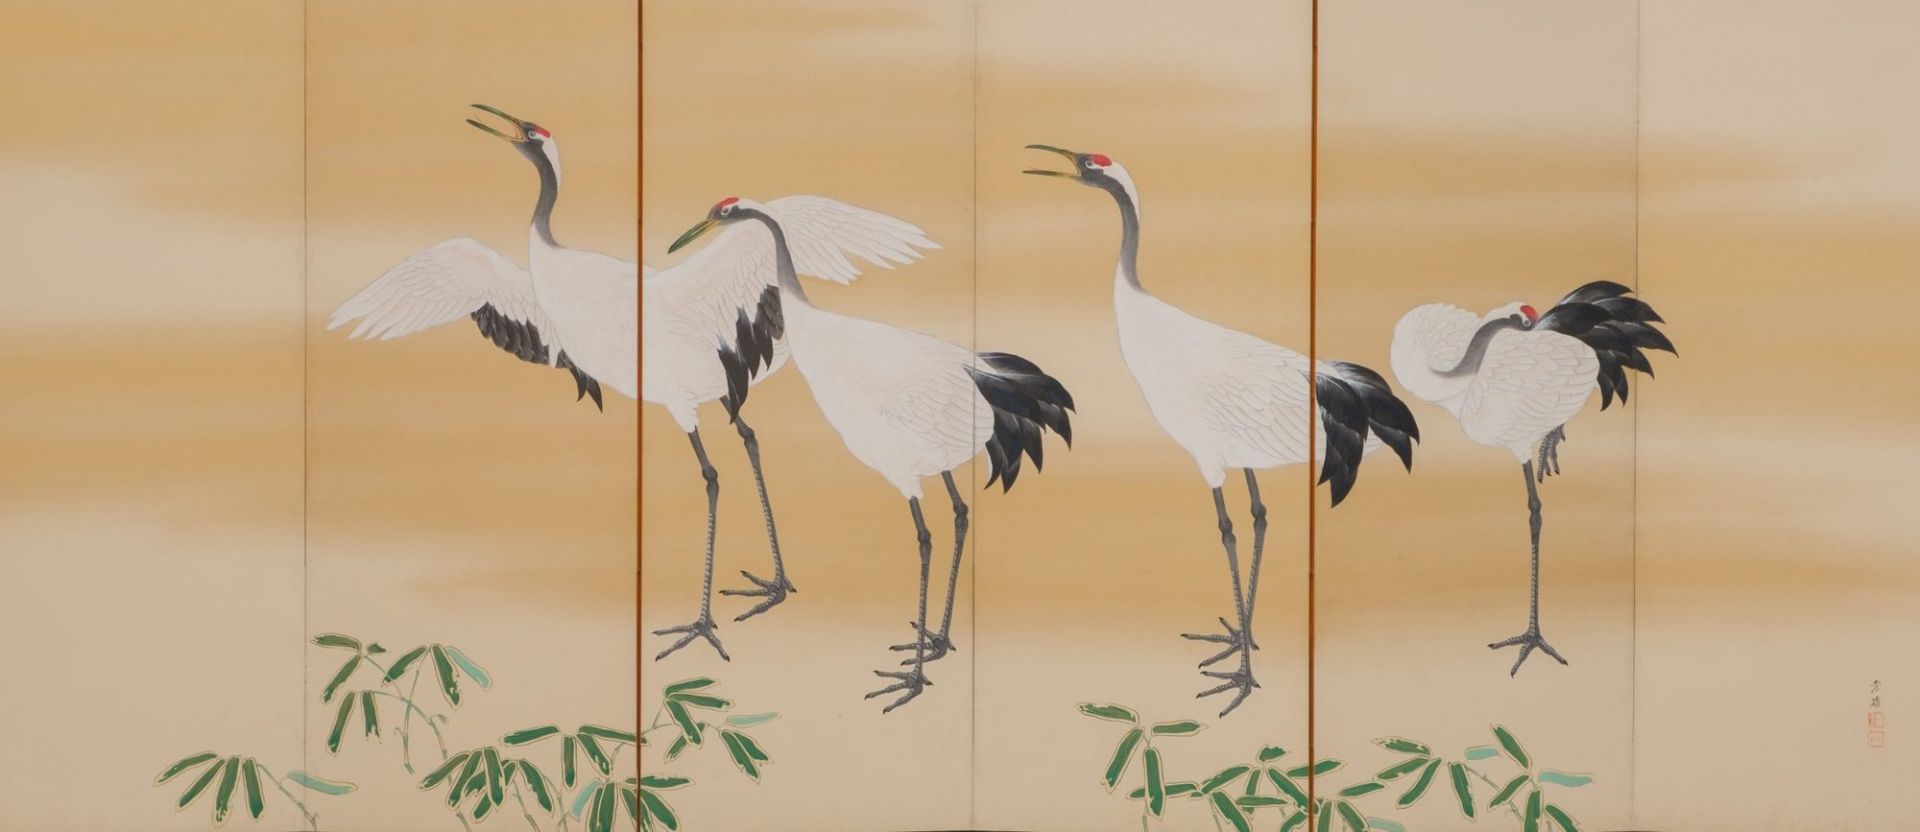 A JAPANESE MID-SIZE 6-PANEL RINPA STYLE BYÔBU (FOLDING SCREEN) WITH CRANES, FIRST HALF 20TH CENTURY - Image 2 of 13